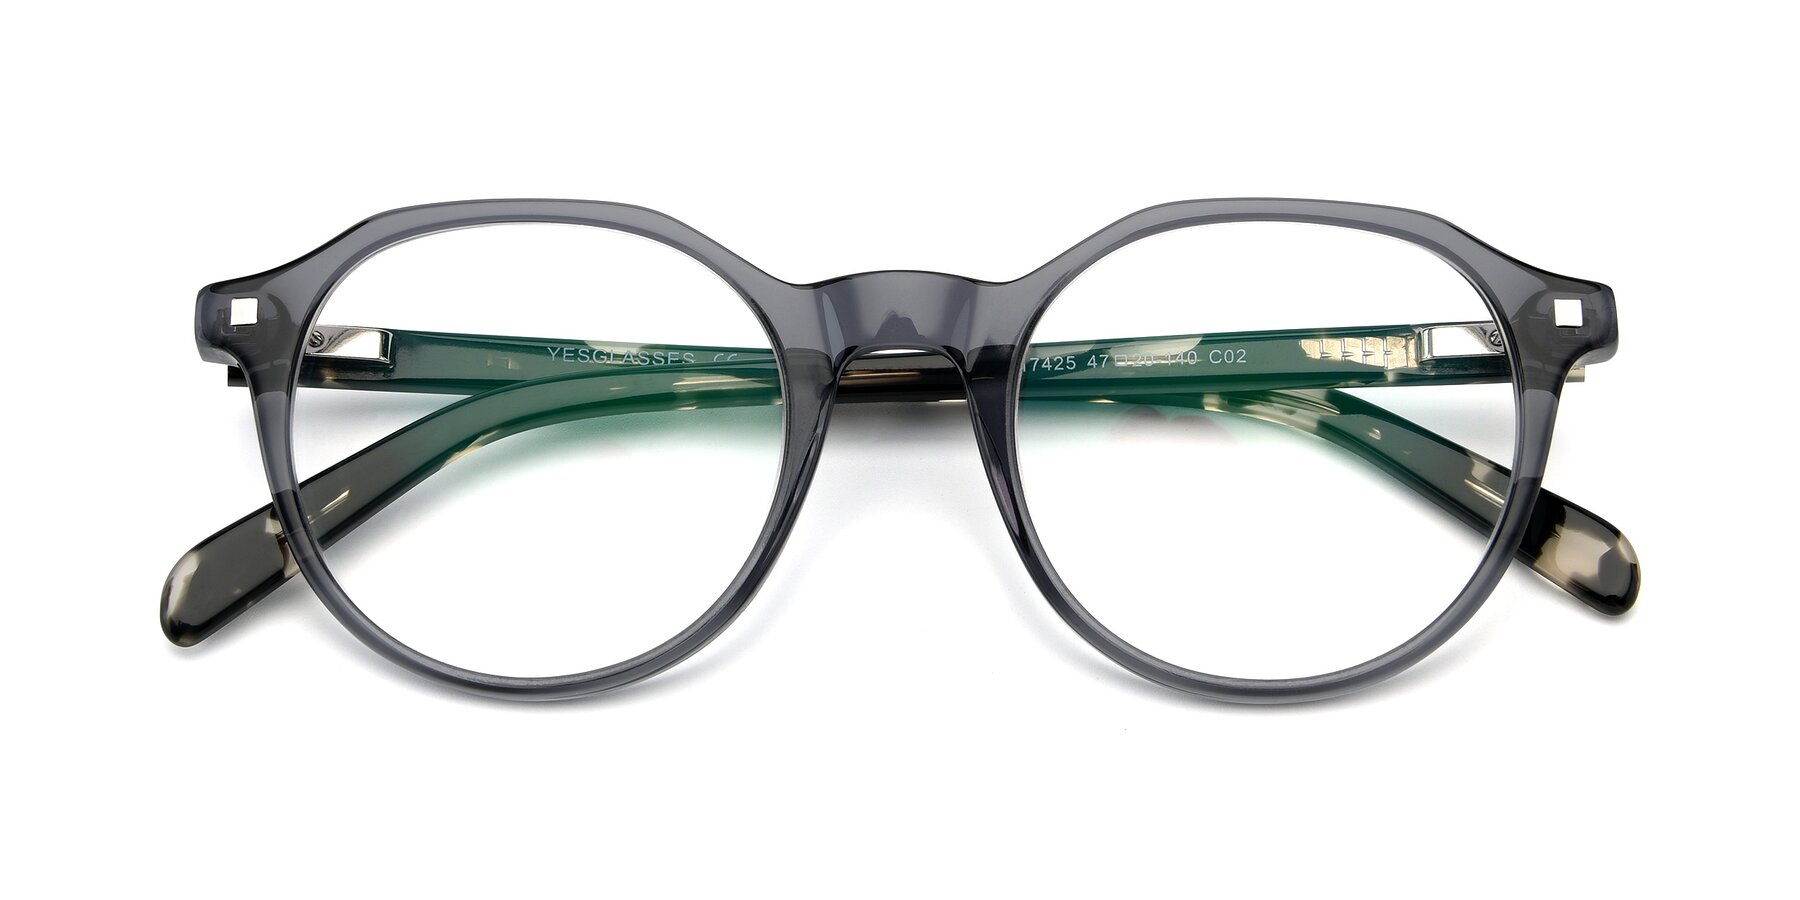 View of 17425 in Transparent Grey with Clear Reading Eyeglass Lenses